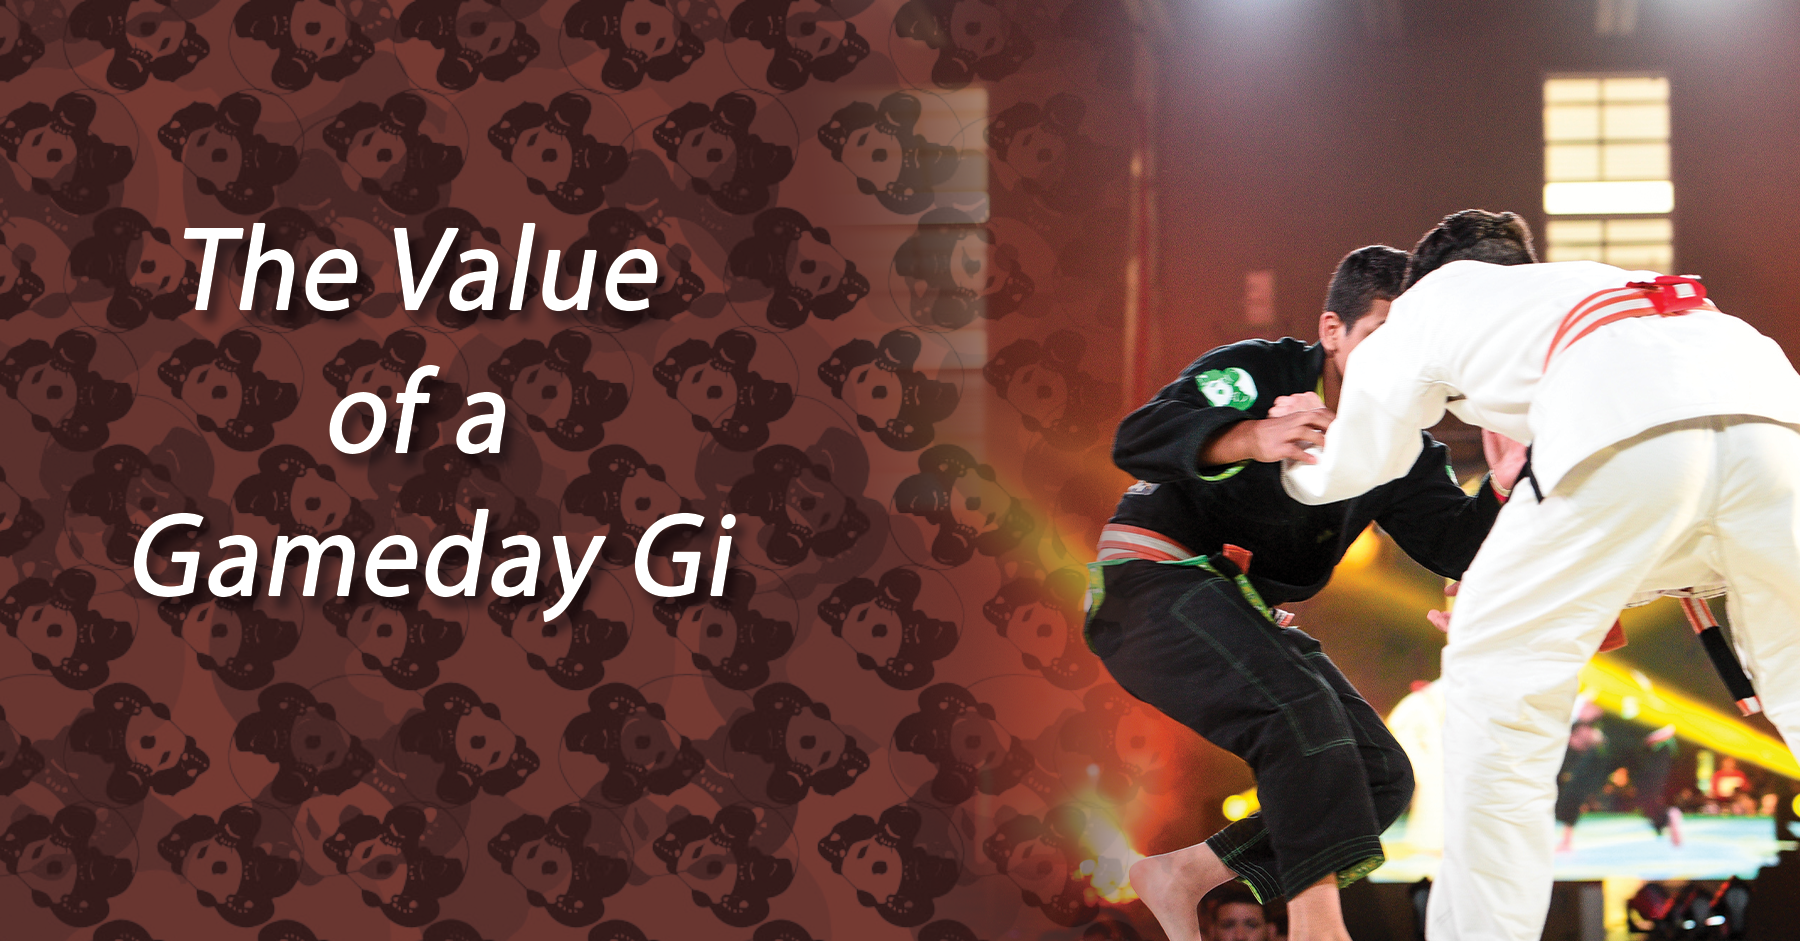 The Value of a Gameday Gi